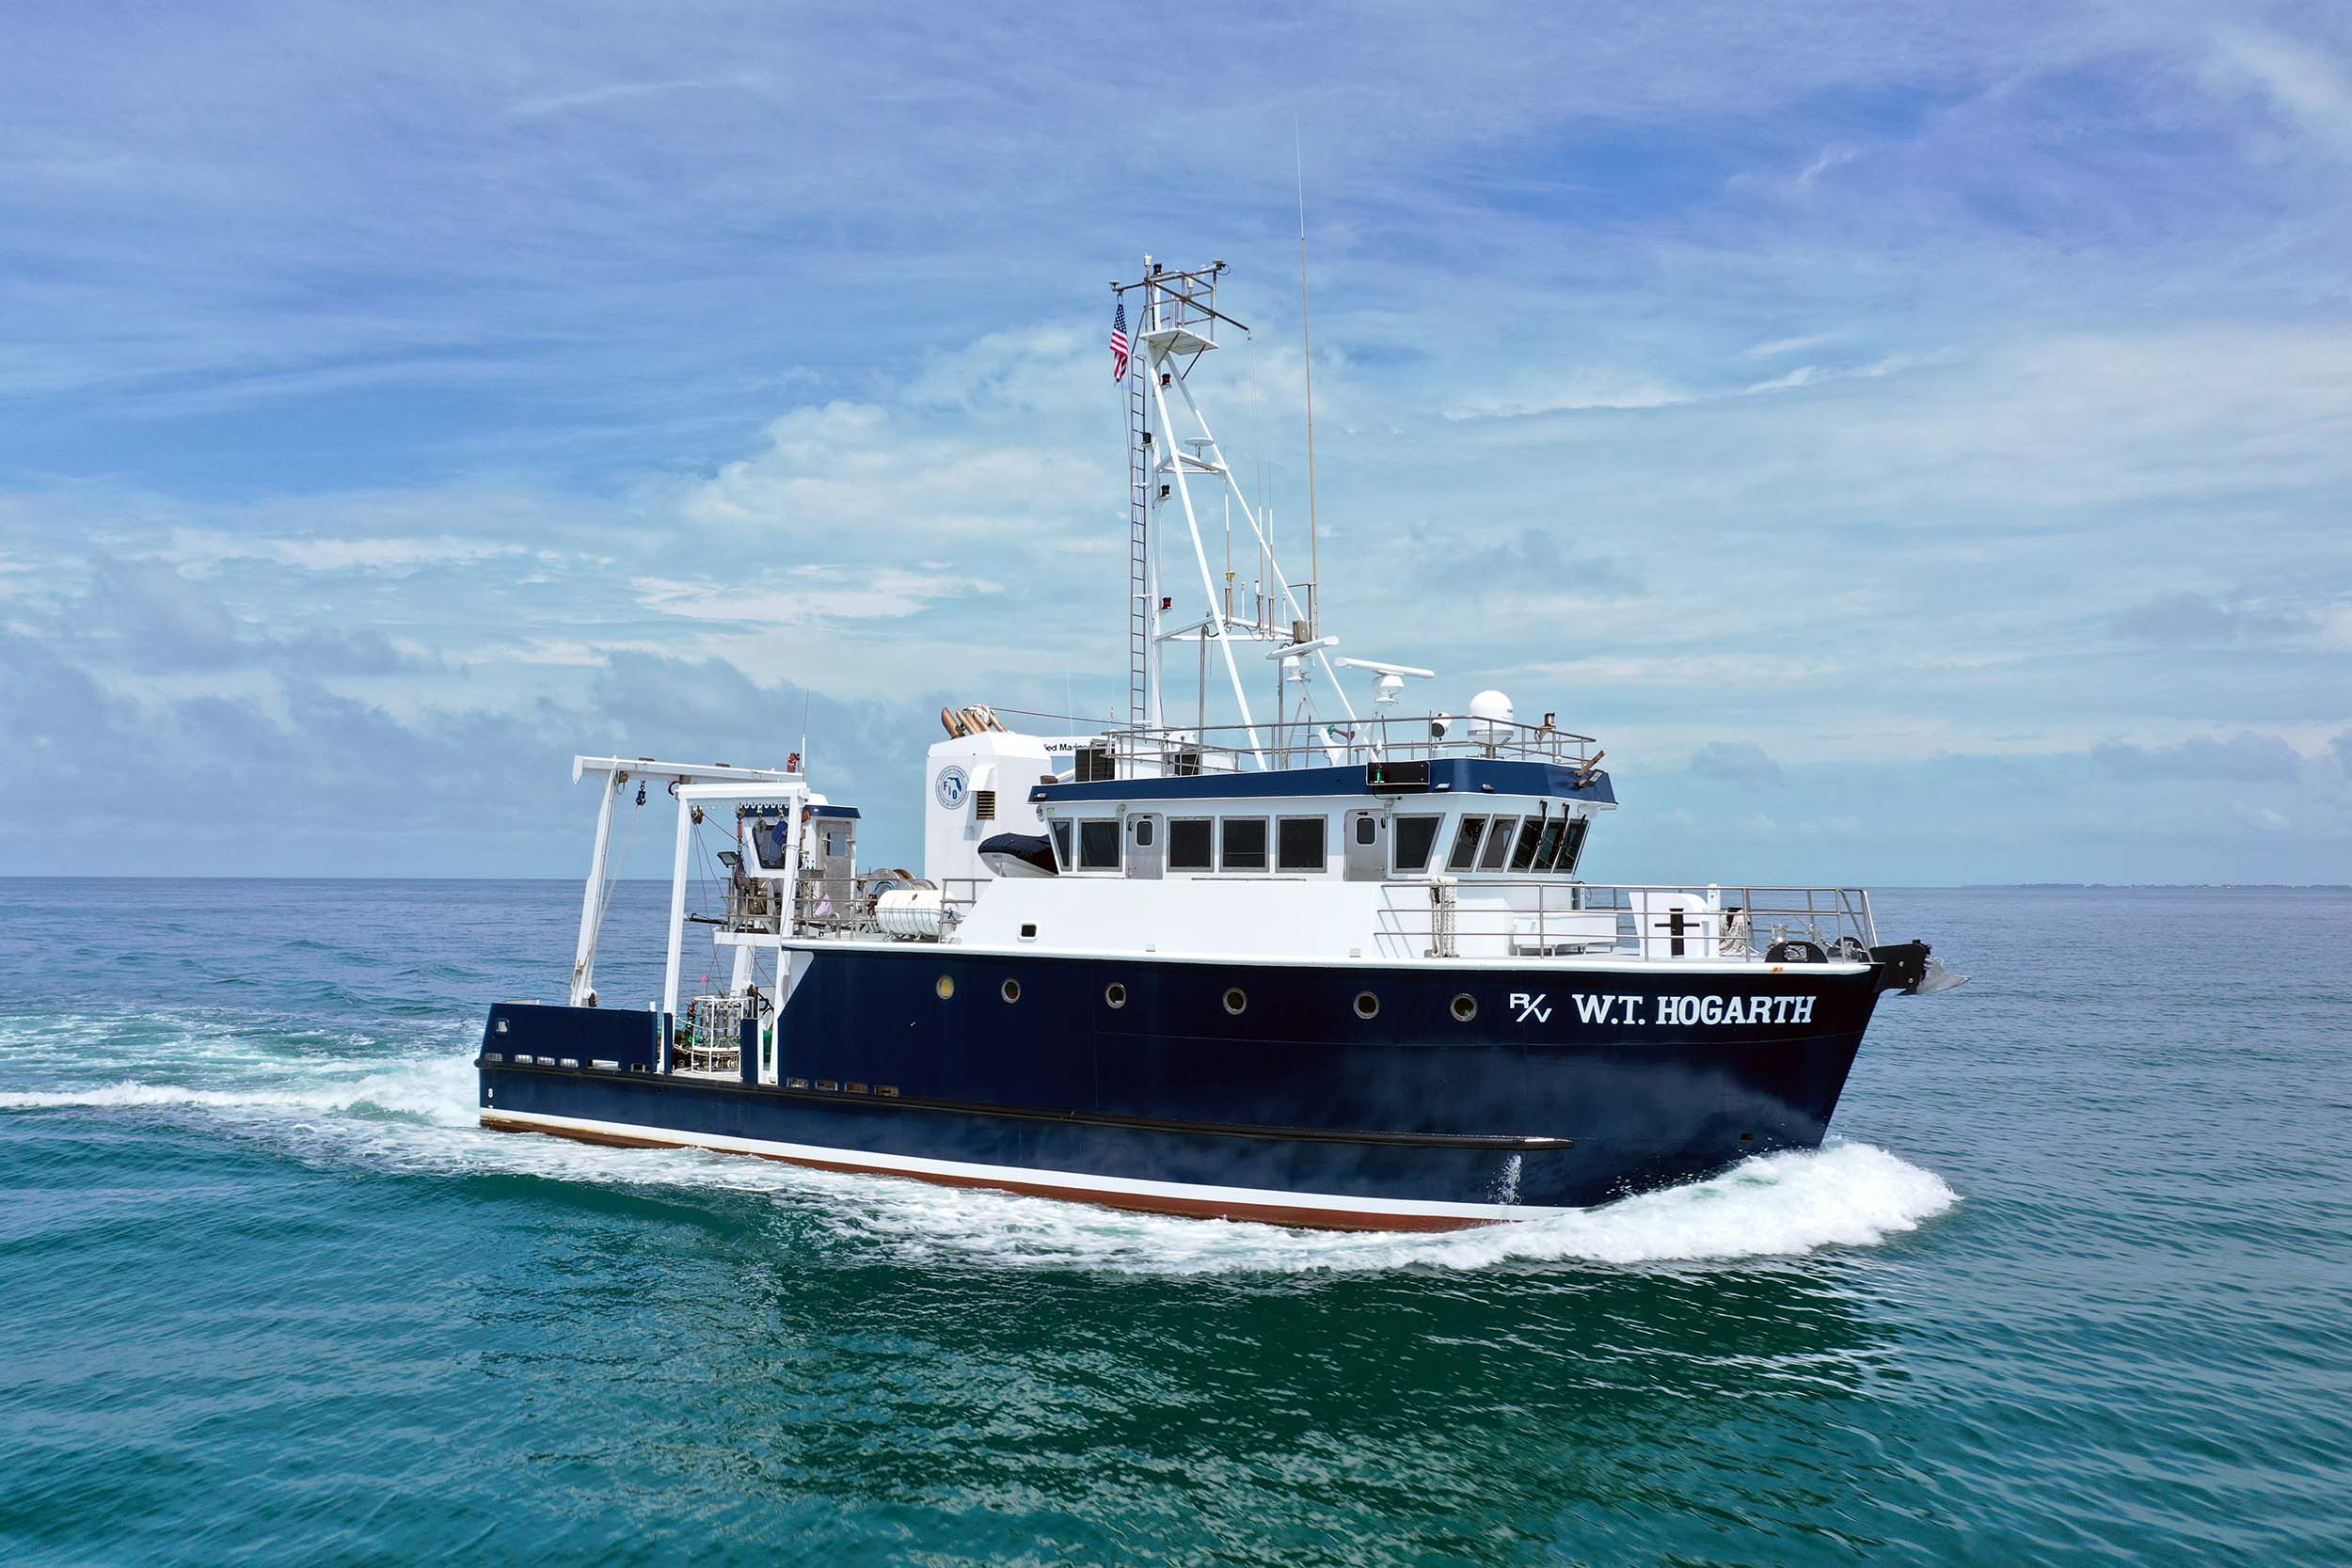 Research Vessel (R/V) W.T. Hogarth is equipped with wet & dry labs on board, a Satellite Internet Link, Fisheries Eco-Sounders, Dual Head Swath Bathymetry (for bottom-mapping), a 9-panel video wall, and a Dynamic Positioning System.